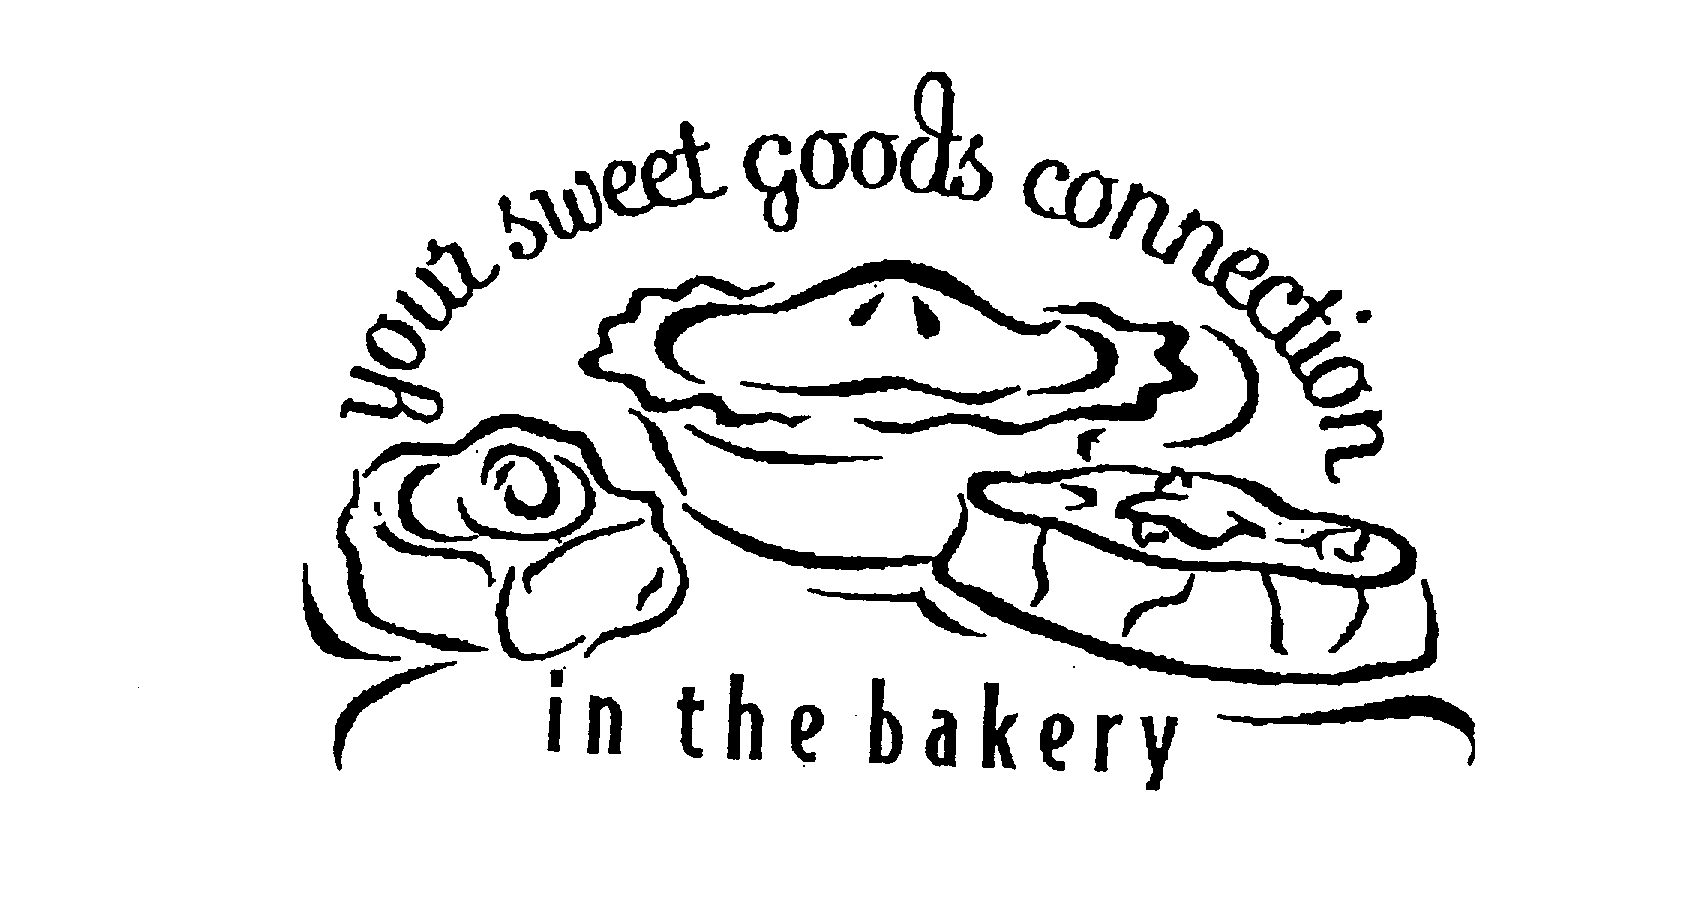 YOUR SWEET GOODS CONNECTION IN THE BAKERY